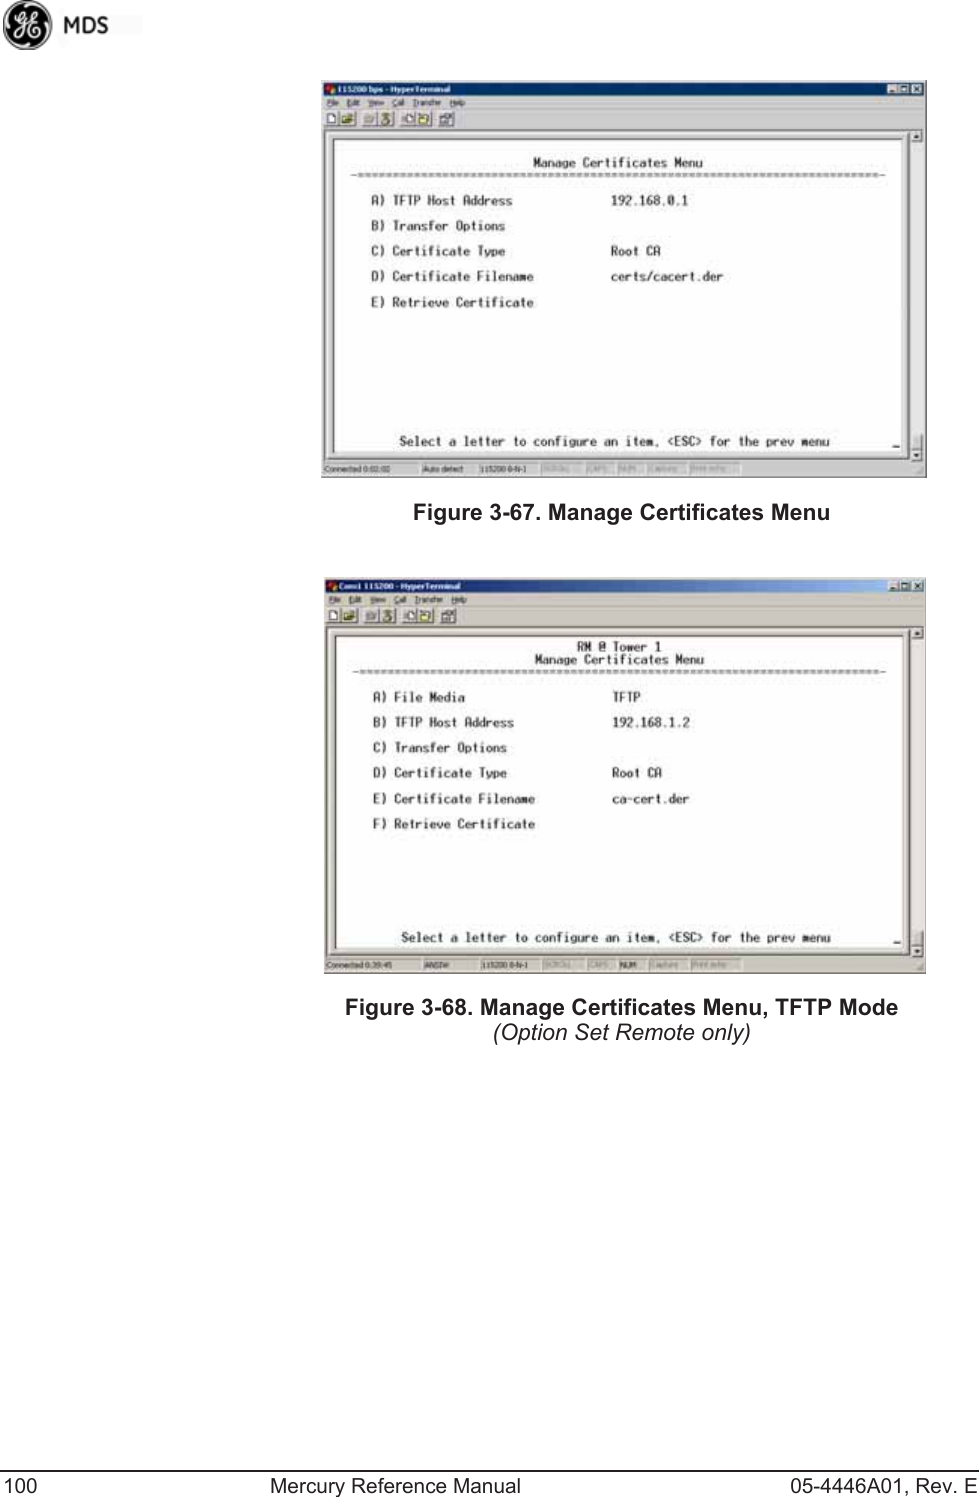 100 Mercury Reference Manual 05-4446A01, Rev. EInvisible place holderFigure 3-67. Manage Certificates MenuInvisible place holderFigure 3-68. Manage Certificates Menu, TFTP Mode(Option Set Remote only)